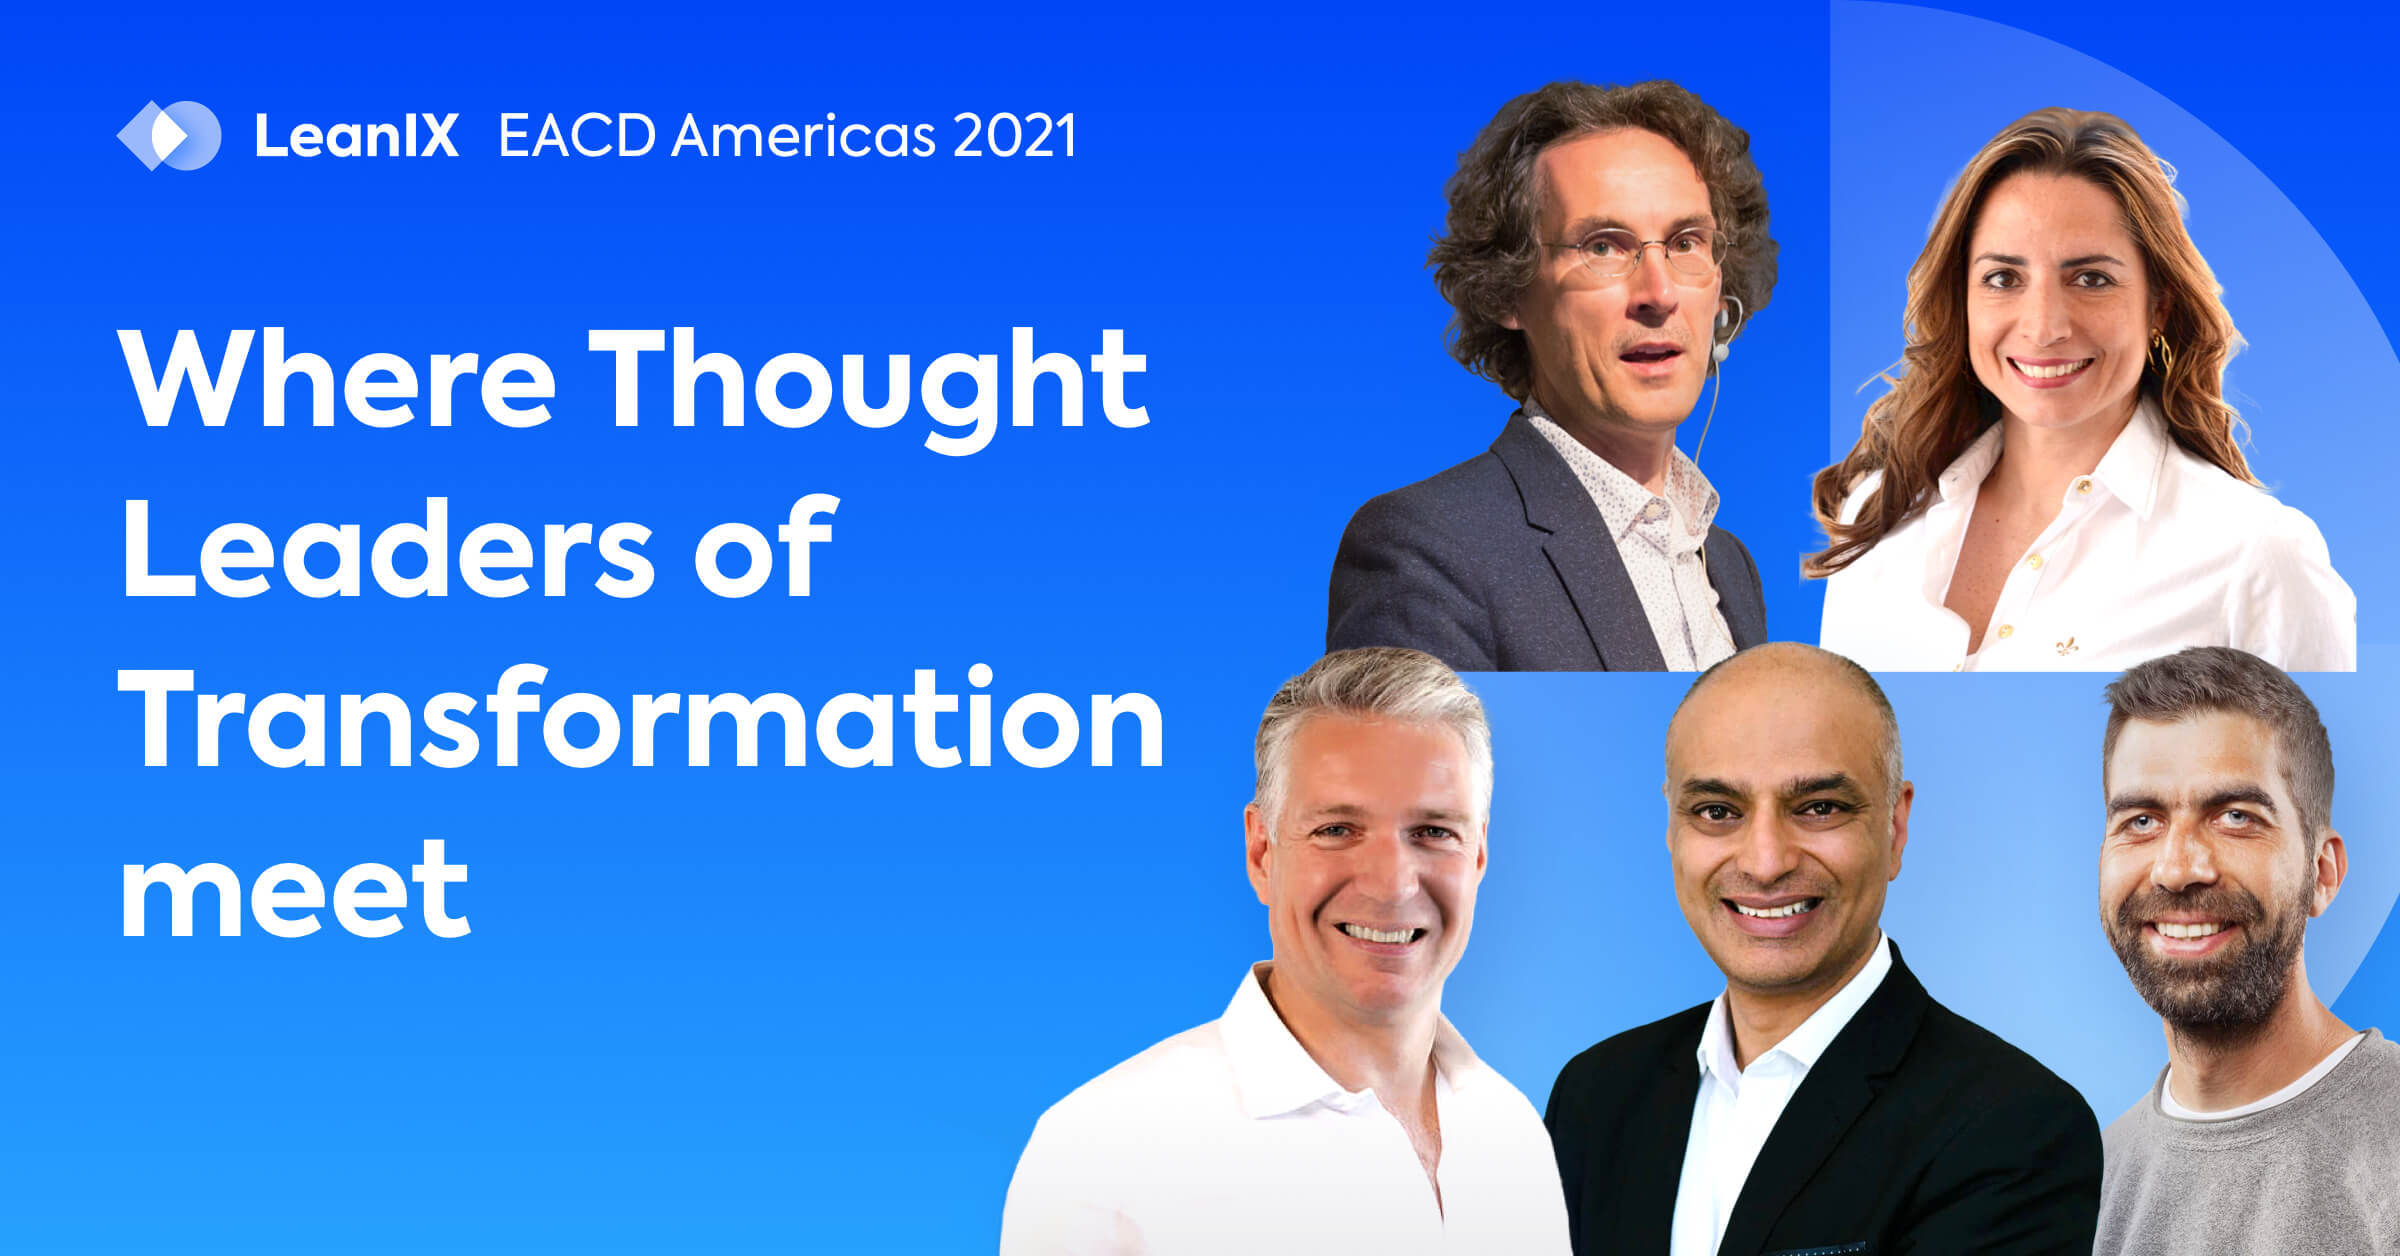 EACD Americas 2021 Where Thought Leaders of Transformation meet